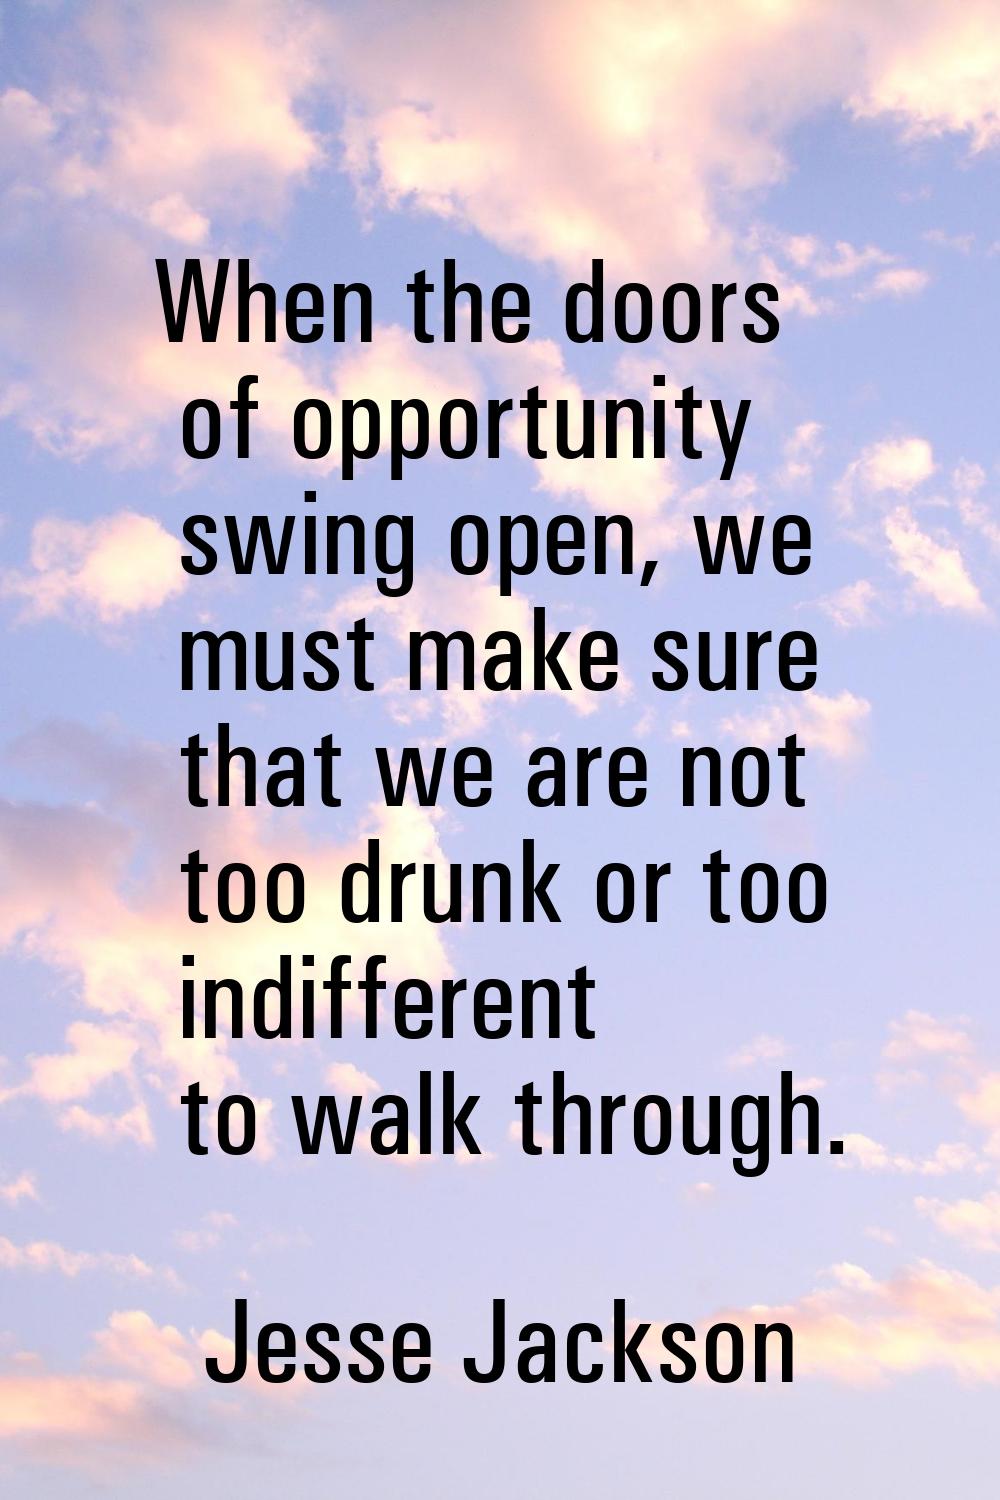 When the doors of opportunity swing open, we must make sure that we are not too drunk or too indiff